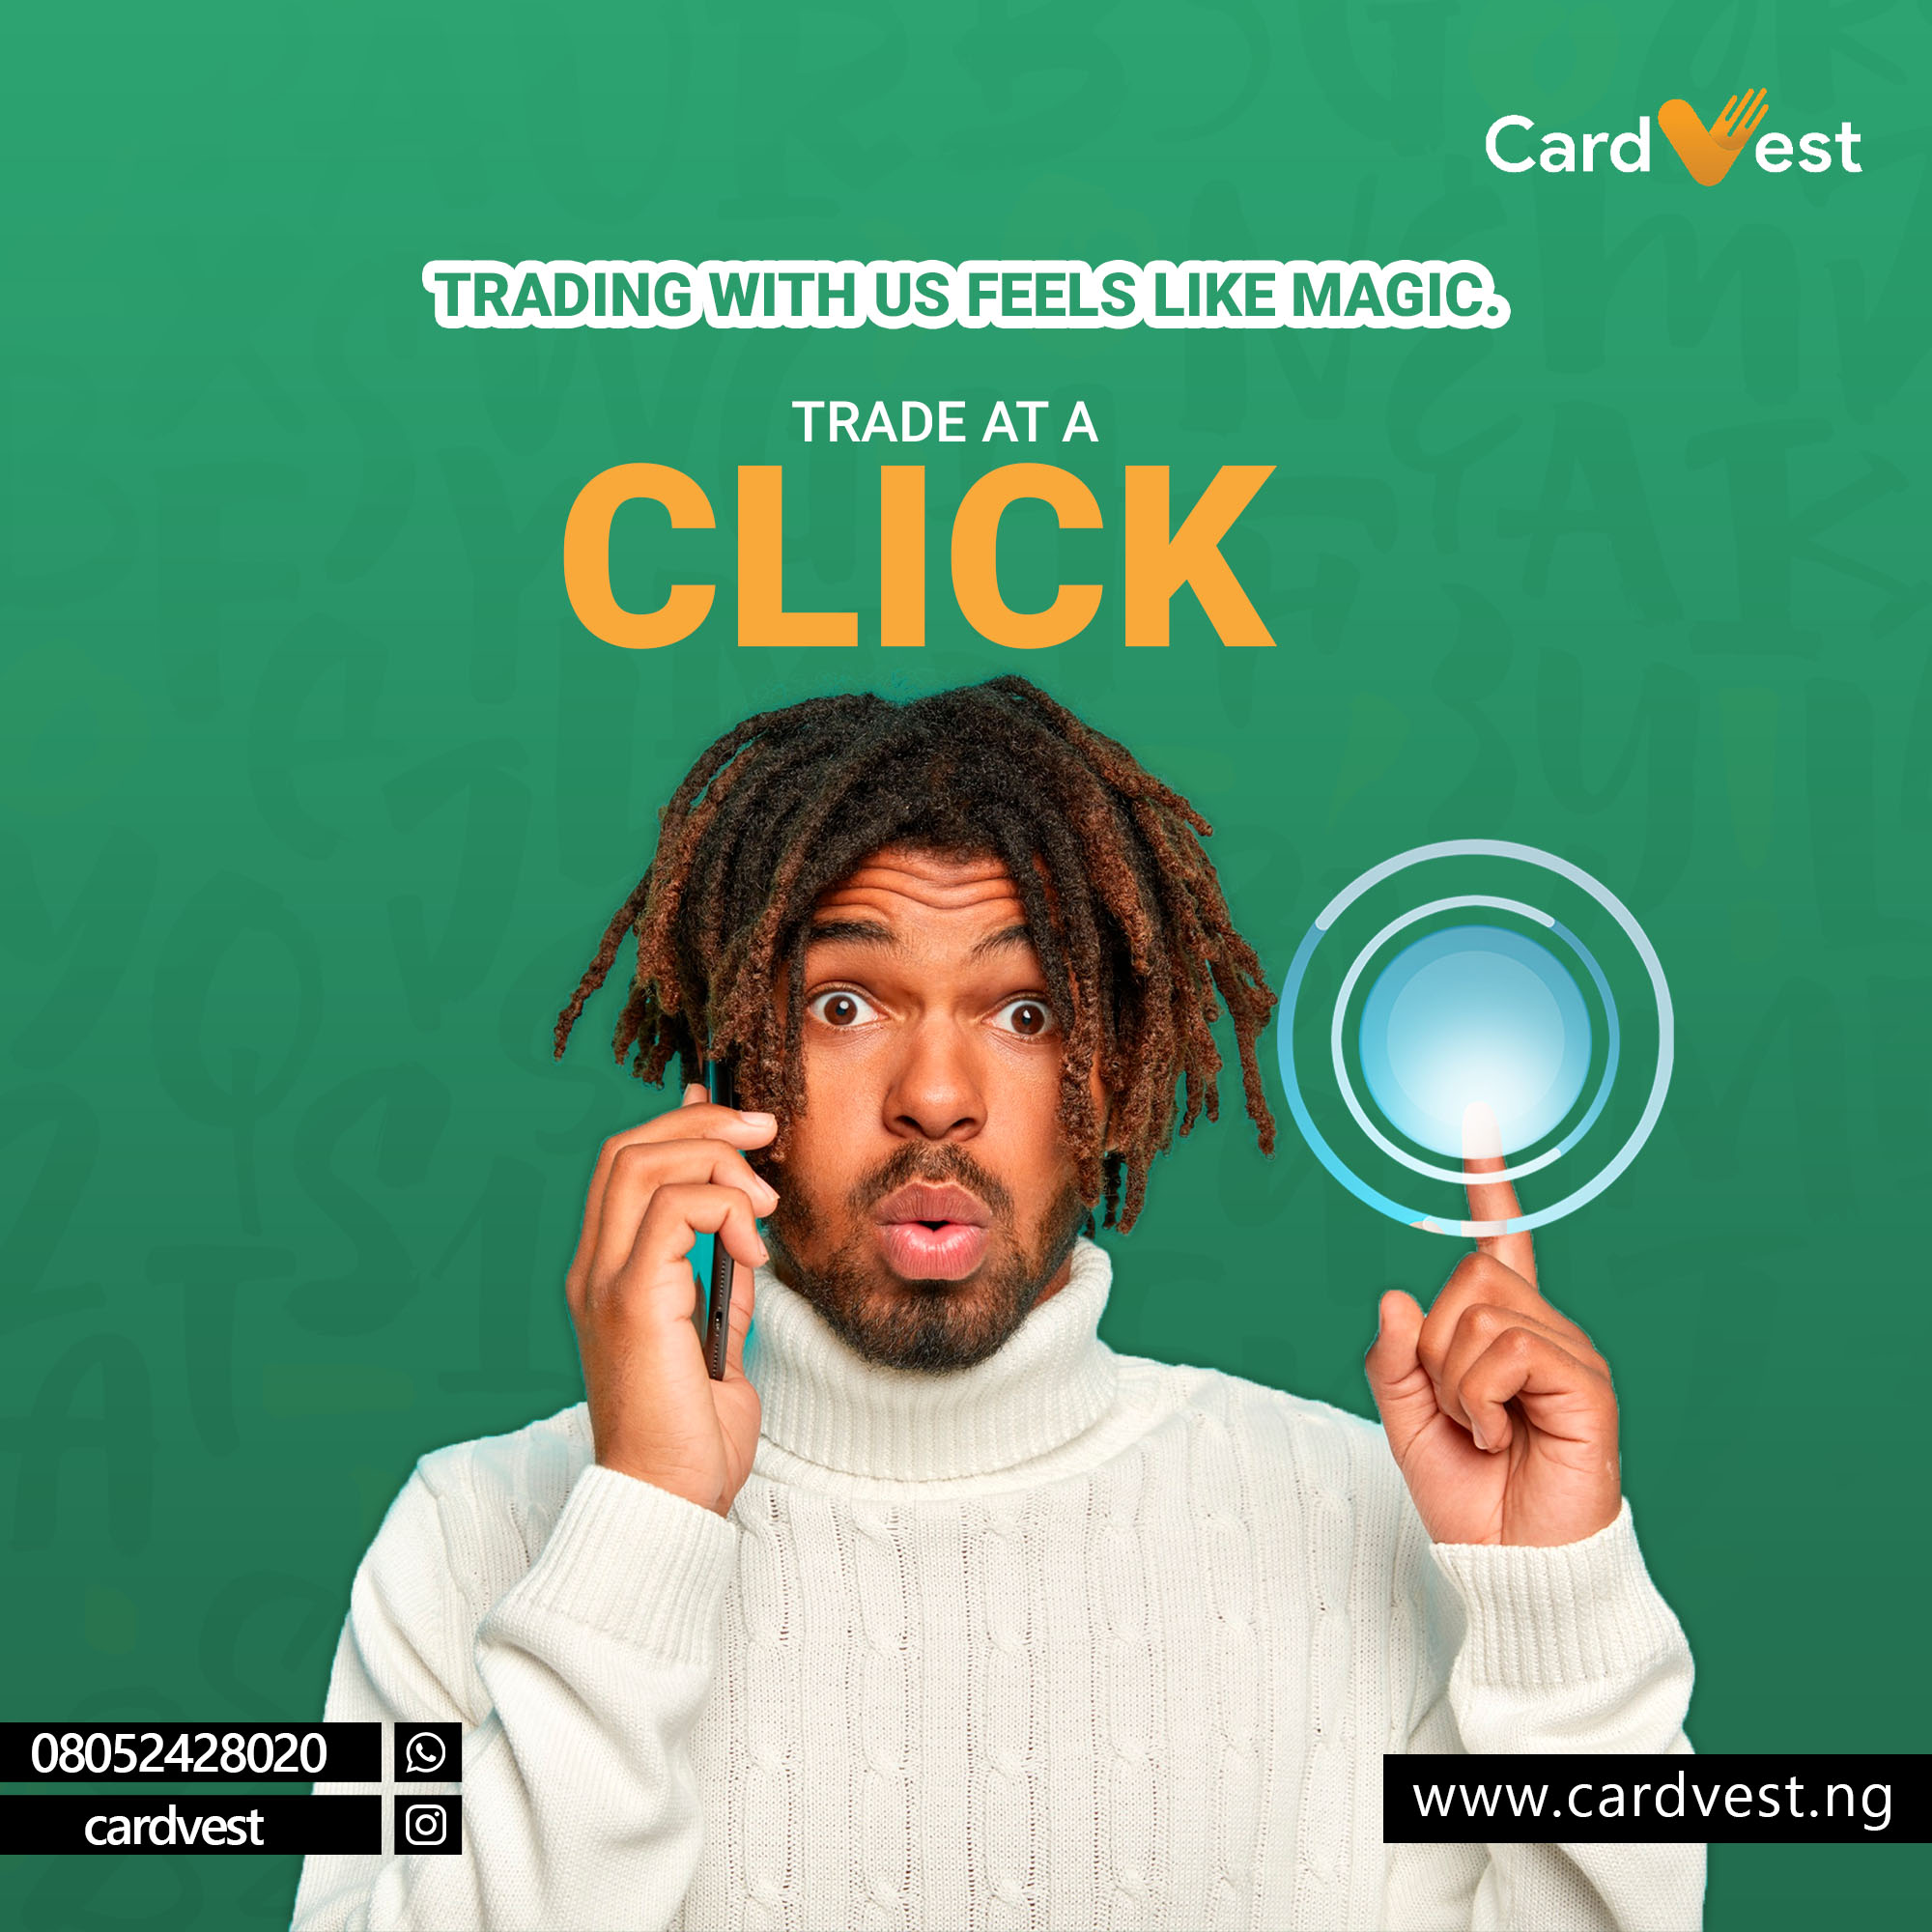 What you need to know about CardVest App- Sell Giftcards in Nigeria